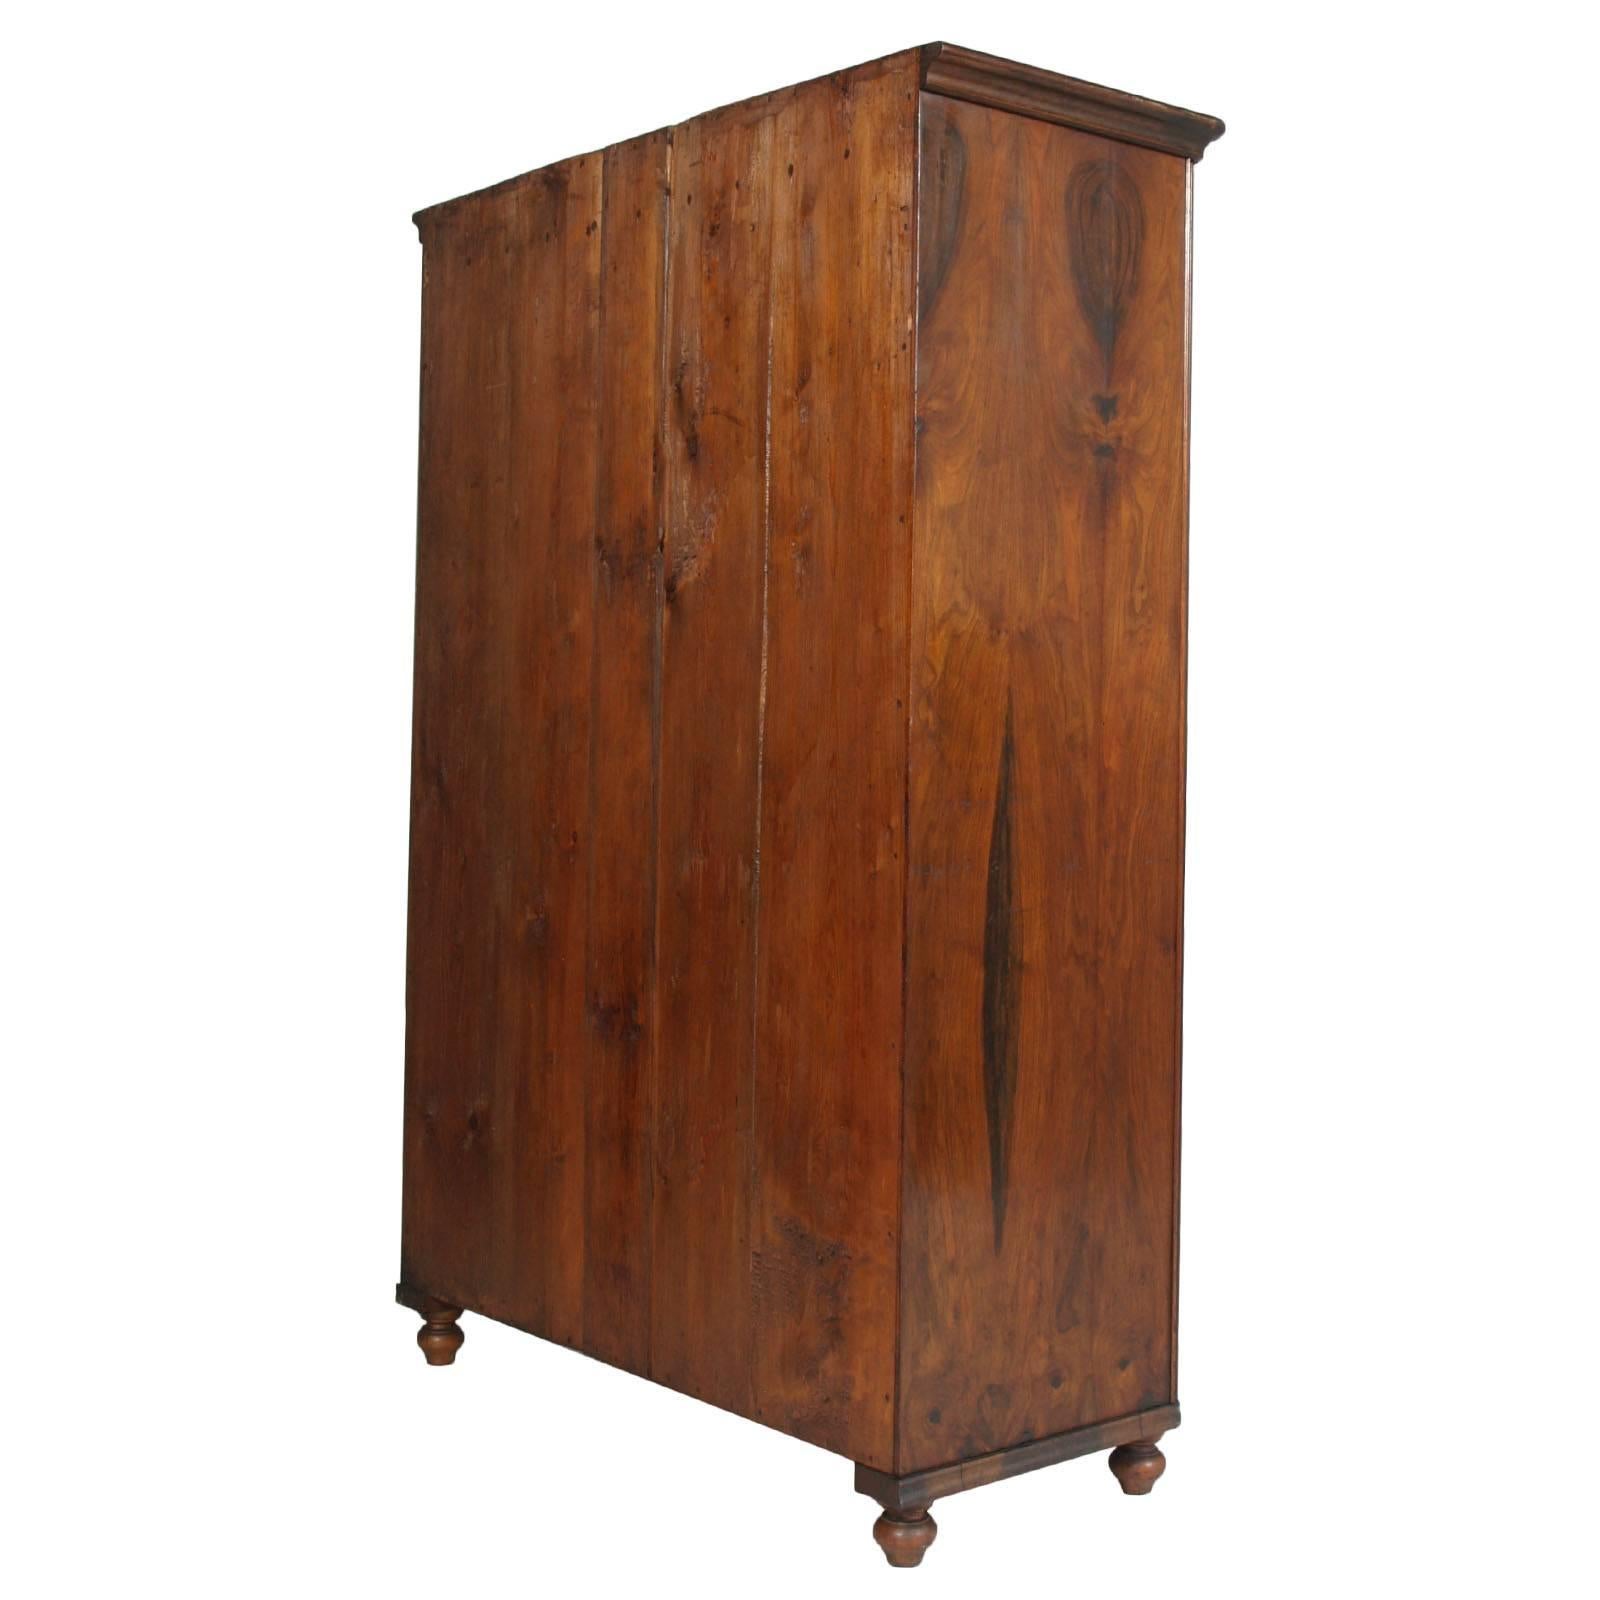 All original 19th century Austrian Biedermeier wardrobe cabinet in solid walnut wax polished. With coat hooks and stick


Measures cm: H 183, W 120, D 50.